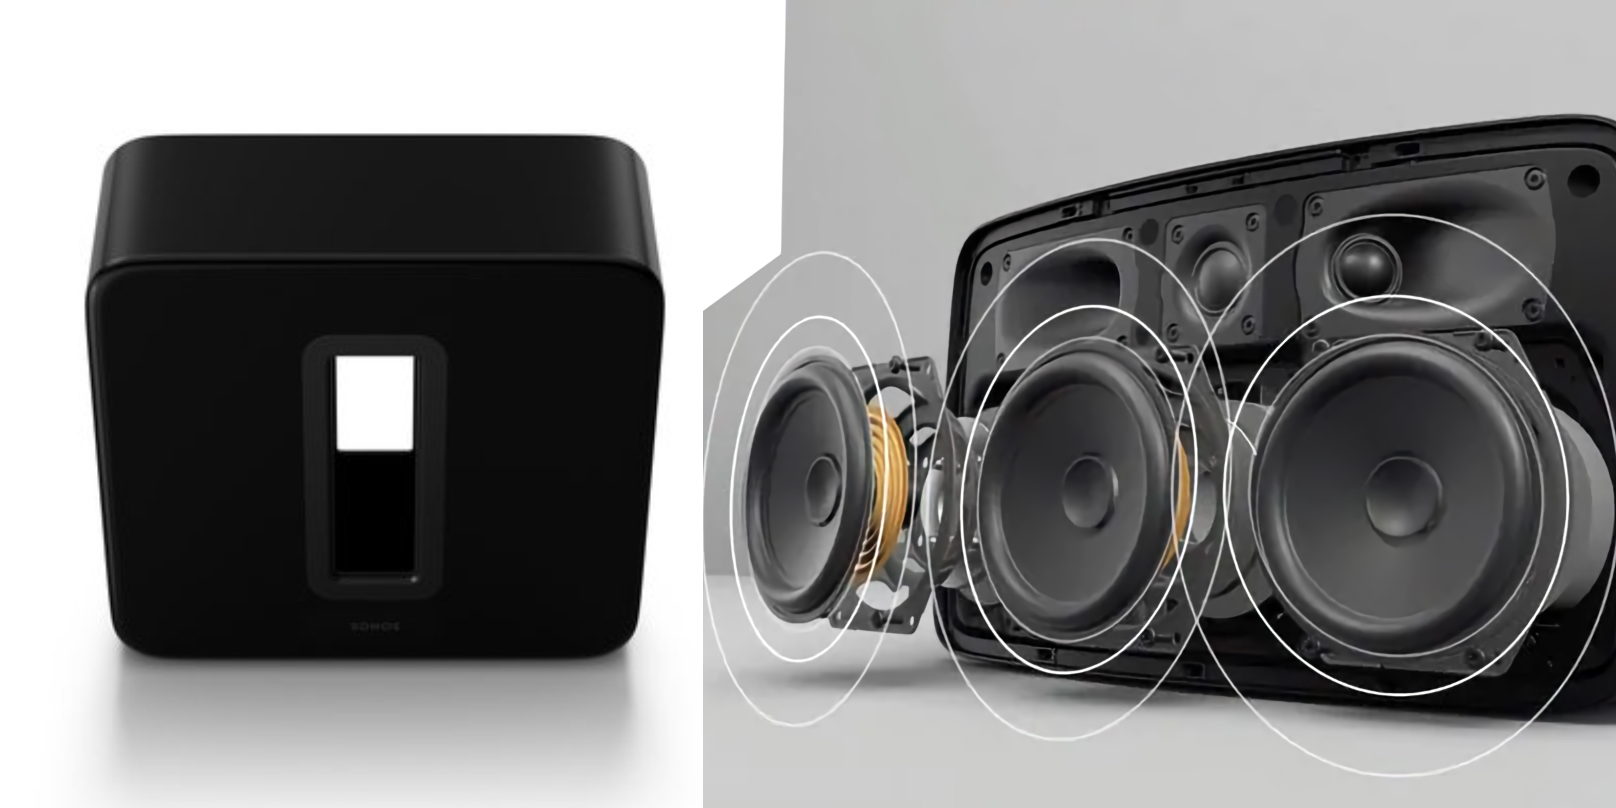 tit præcedens Tomhed Upcoming 'Sonos Five' and 3rd-gen Sonos Sub pictured in leaked photos -  9to5Mac